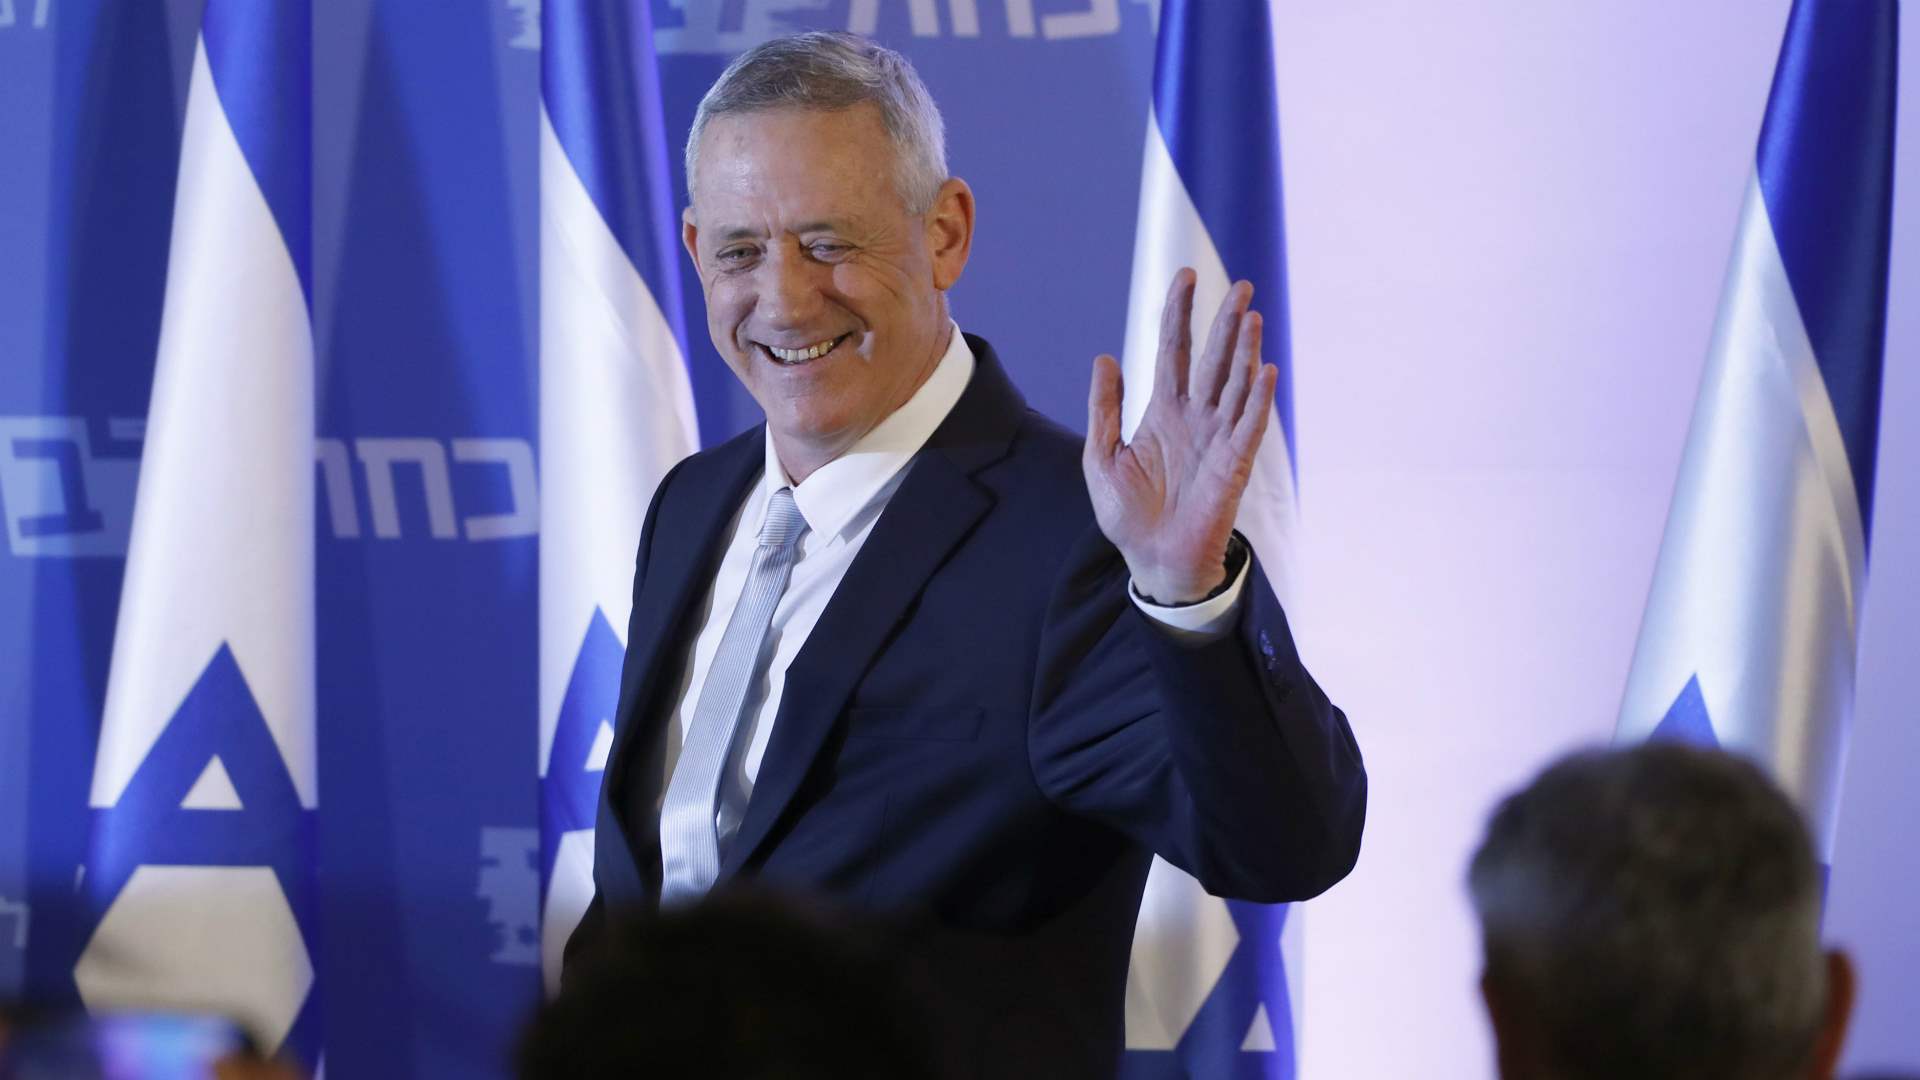 Gantz: The one responsible for launching rockets from Lebanon is not only Hezbollah but the Lebanese state, and the response will be soon and forcefully